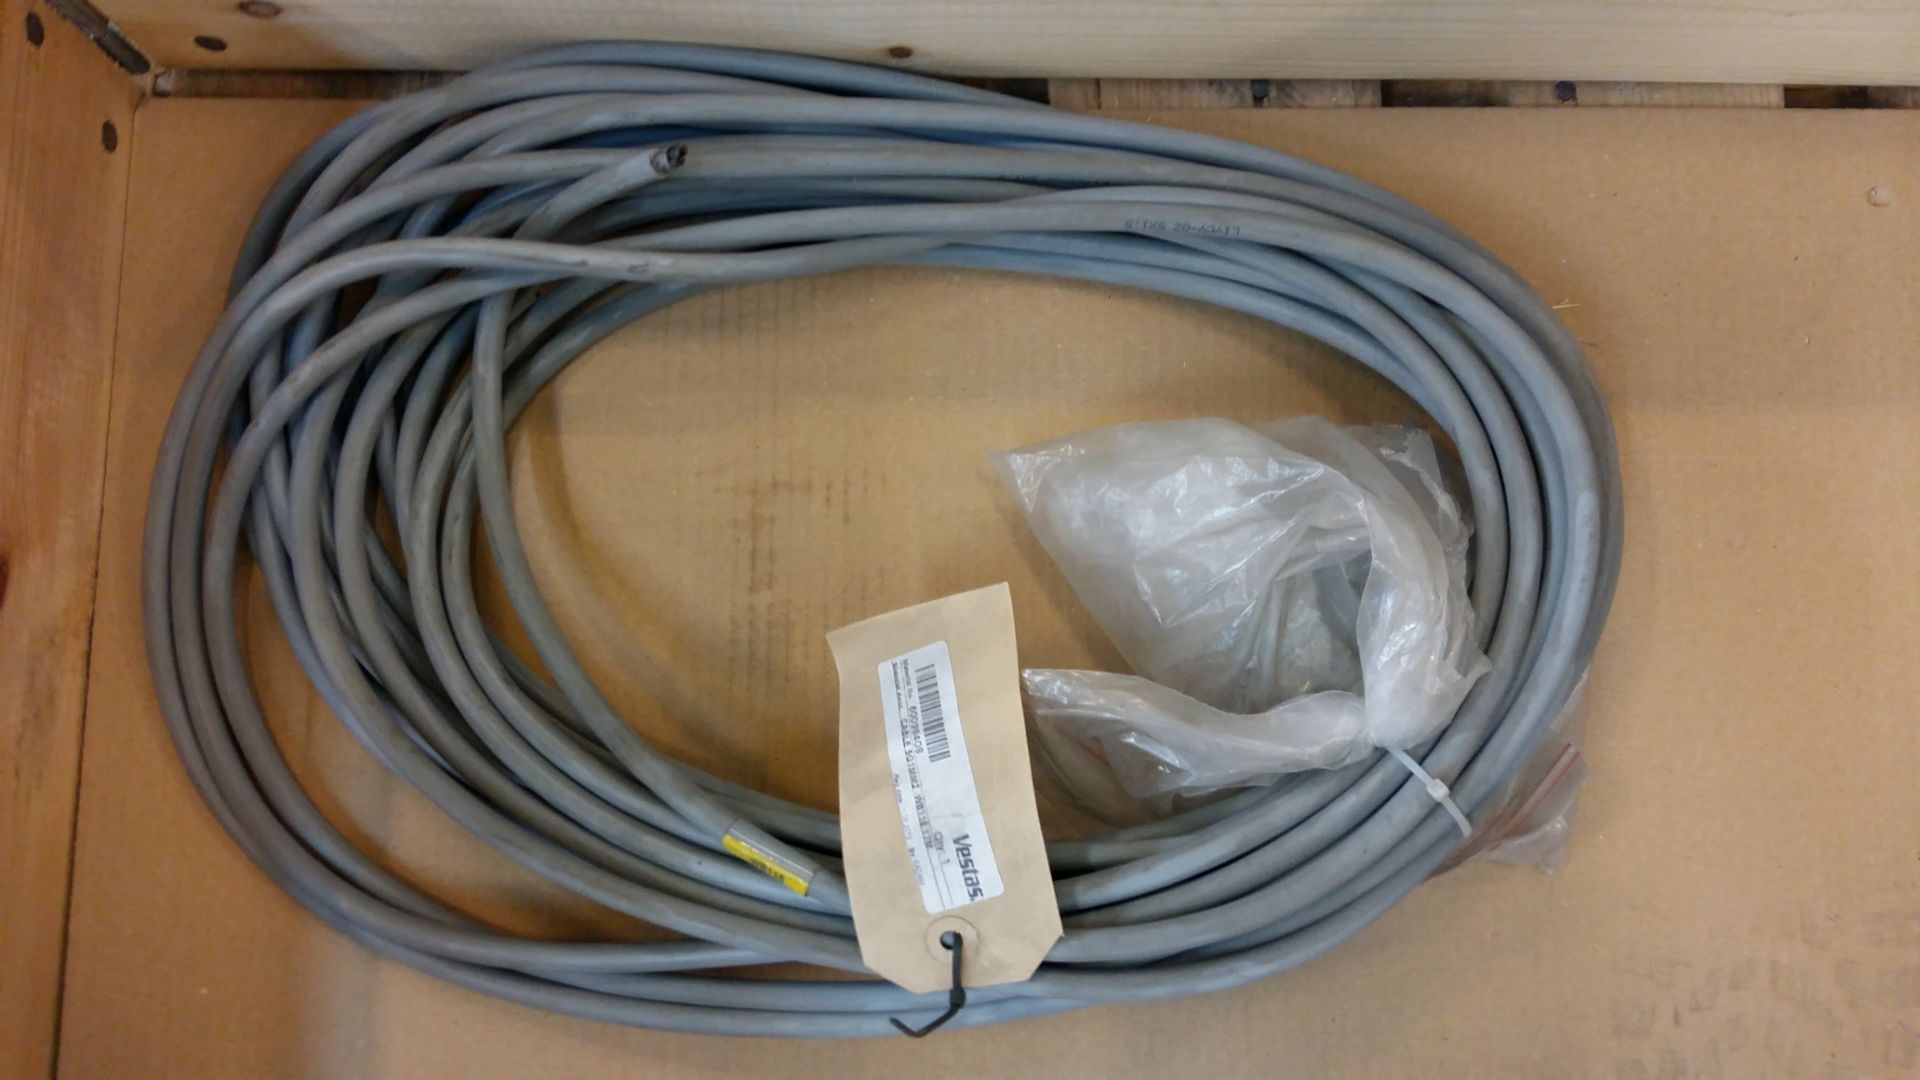 Items From The Material Group Cables & Wires - Image 2 of 3